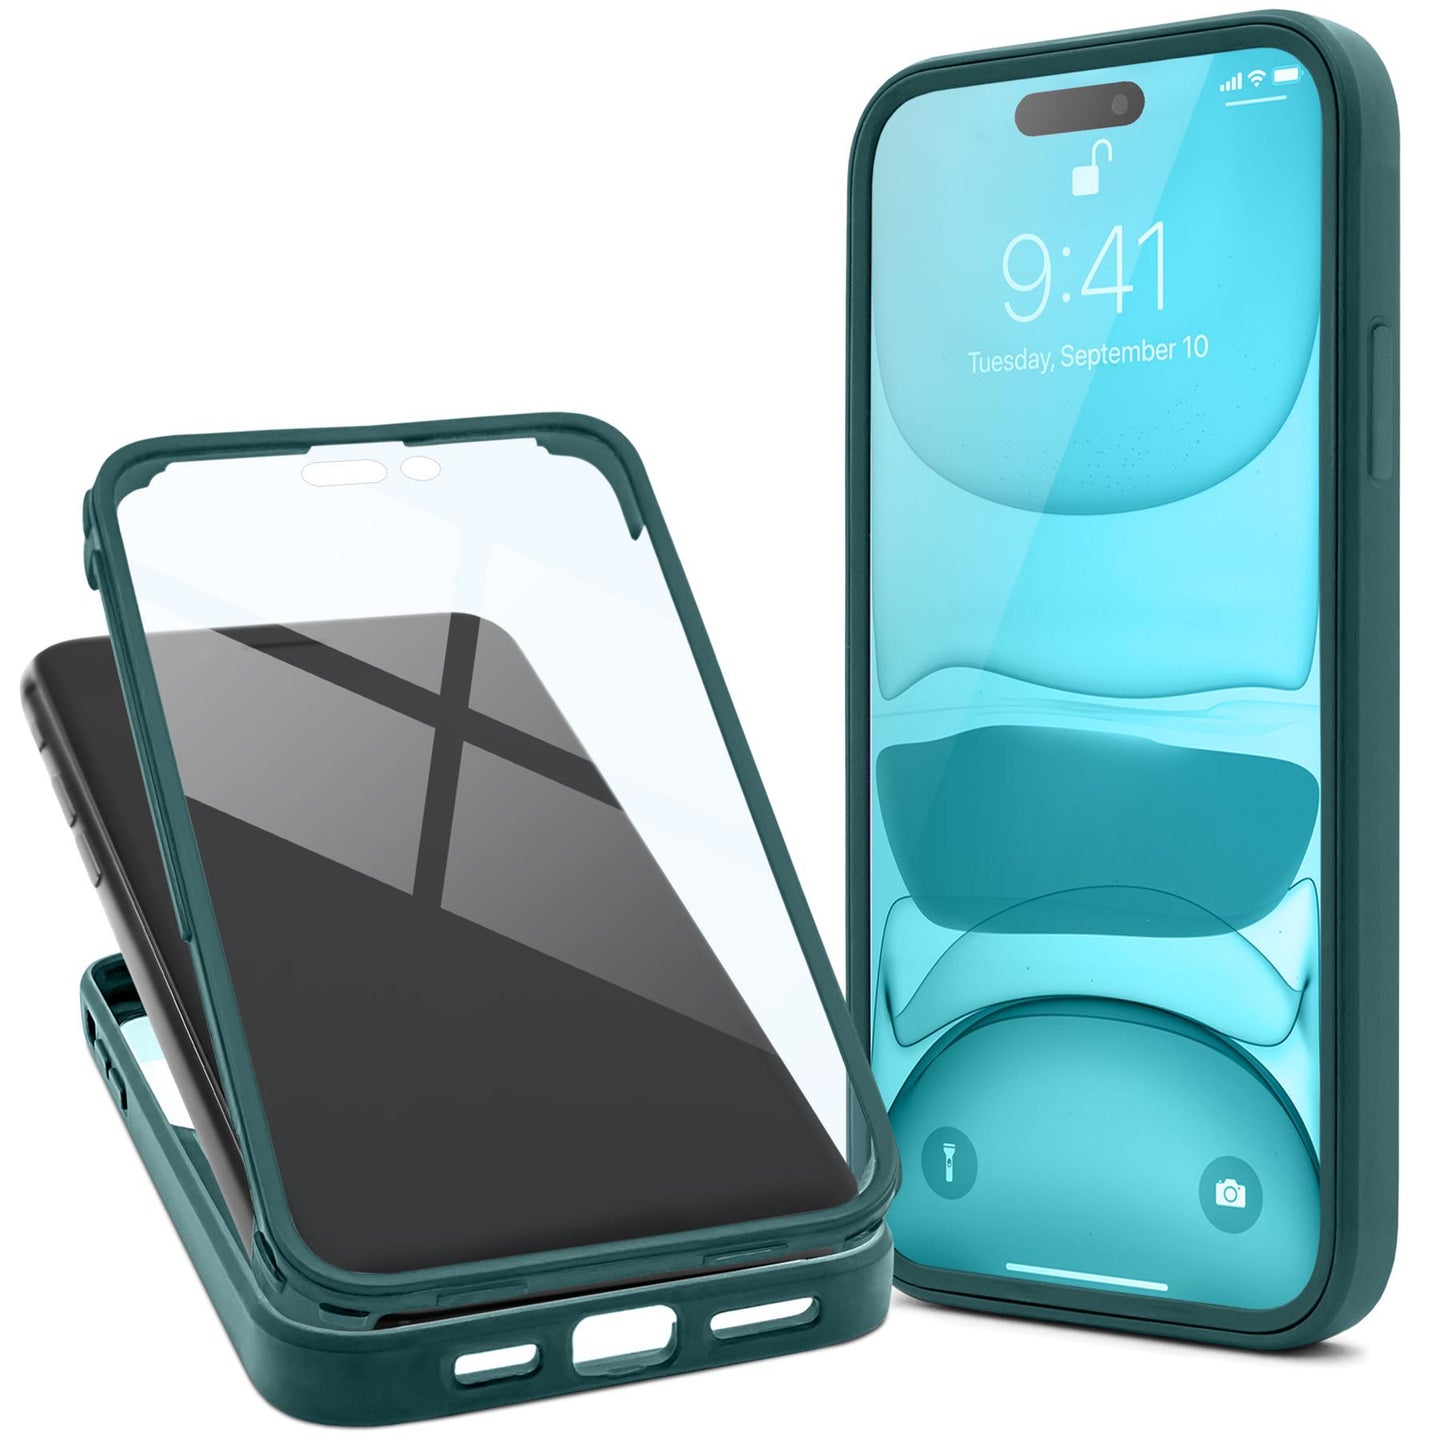 Moozy 360 Case for iPhone 14 Pro - Green Rim Transparent Case, Full Body Double-sided Protection, Cover with Built-in Screen Protector